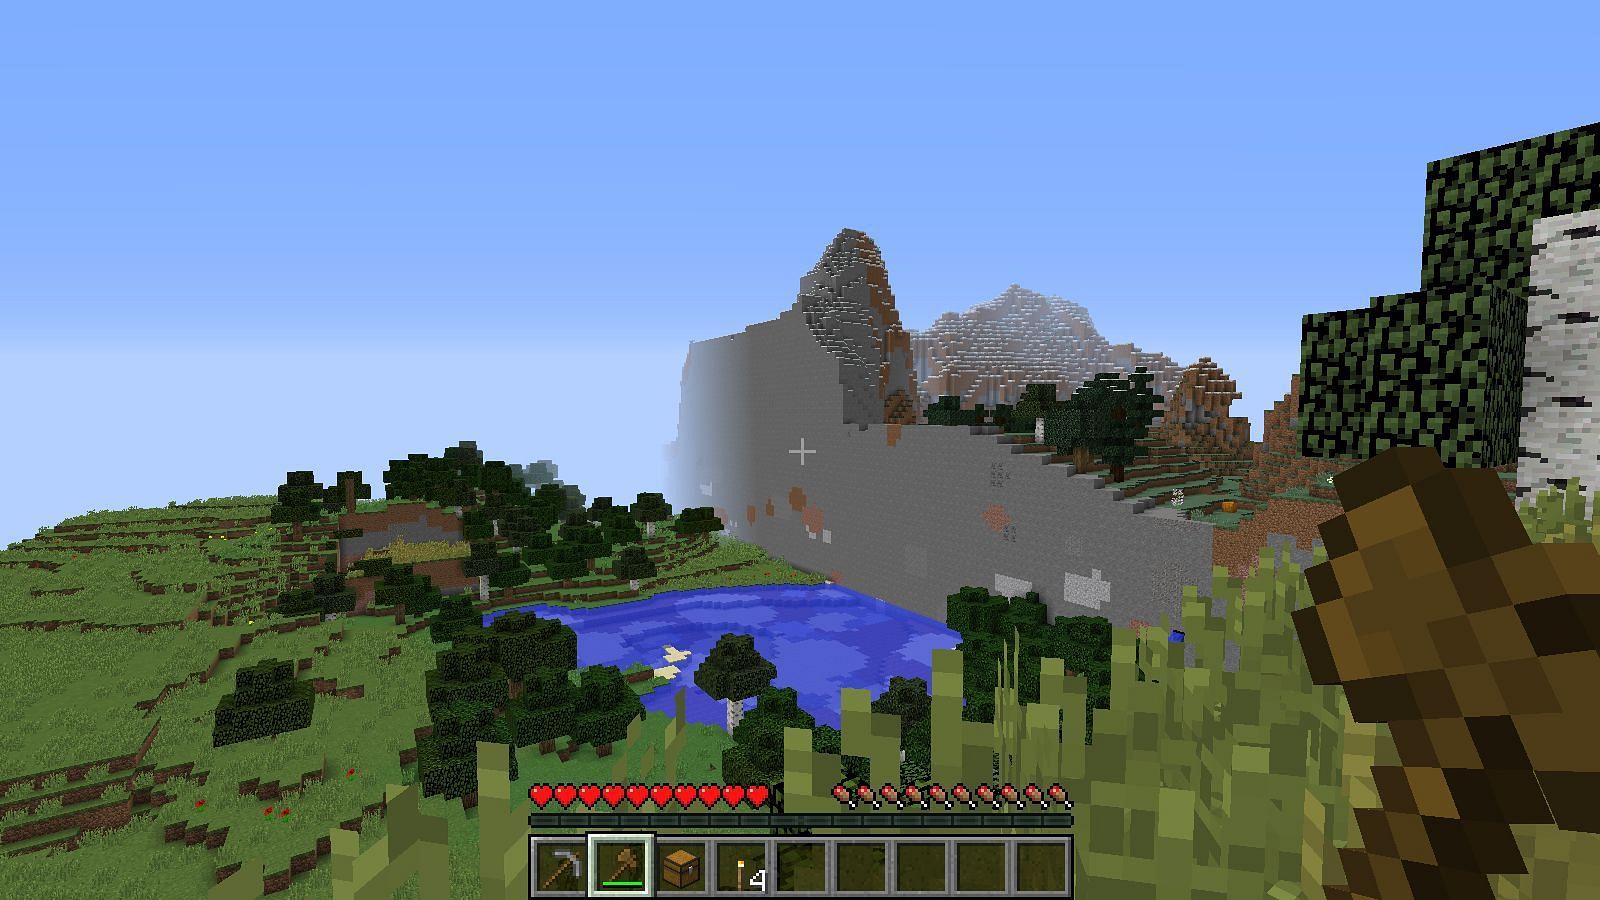 Glitched Minecraft seeds can be great fun to explore (Image via Mojang)